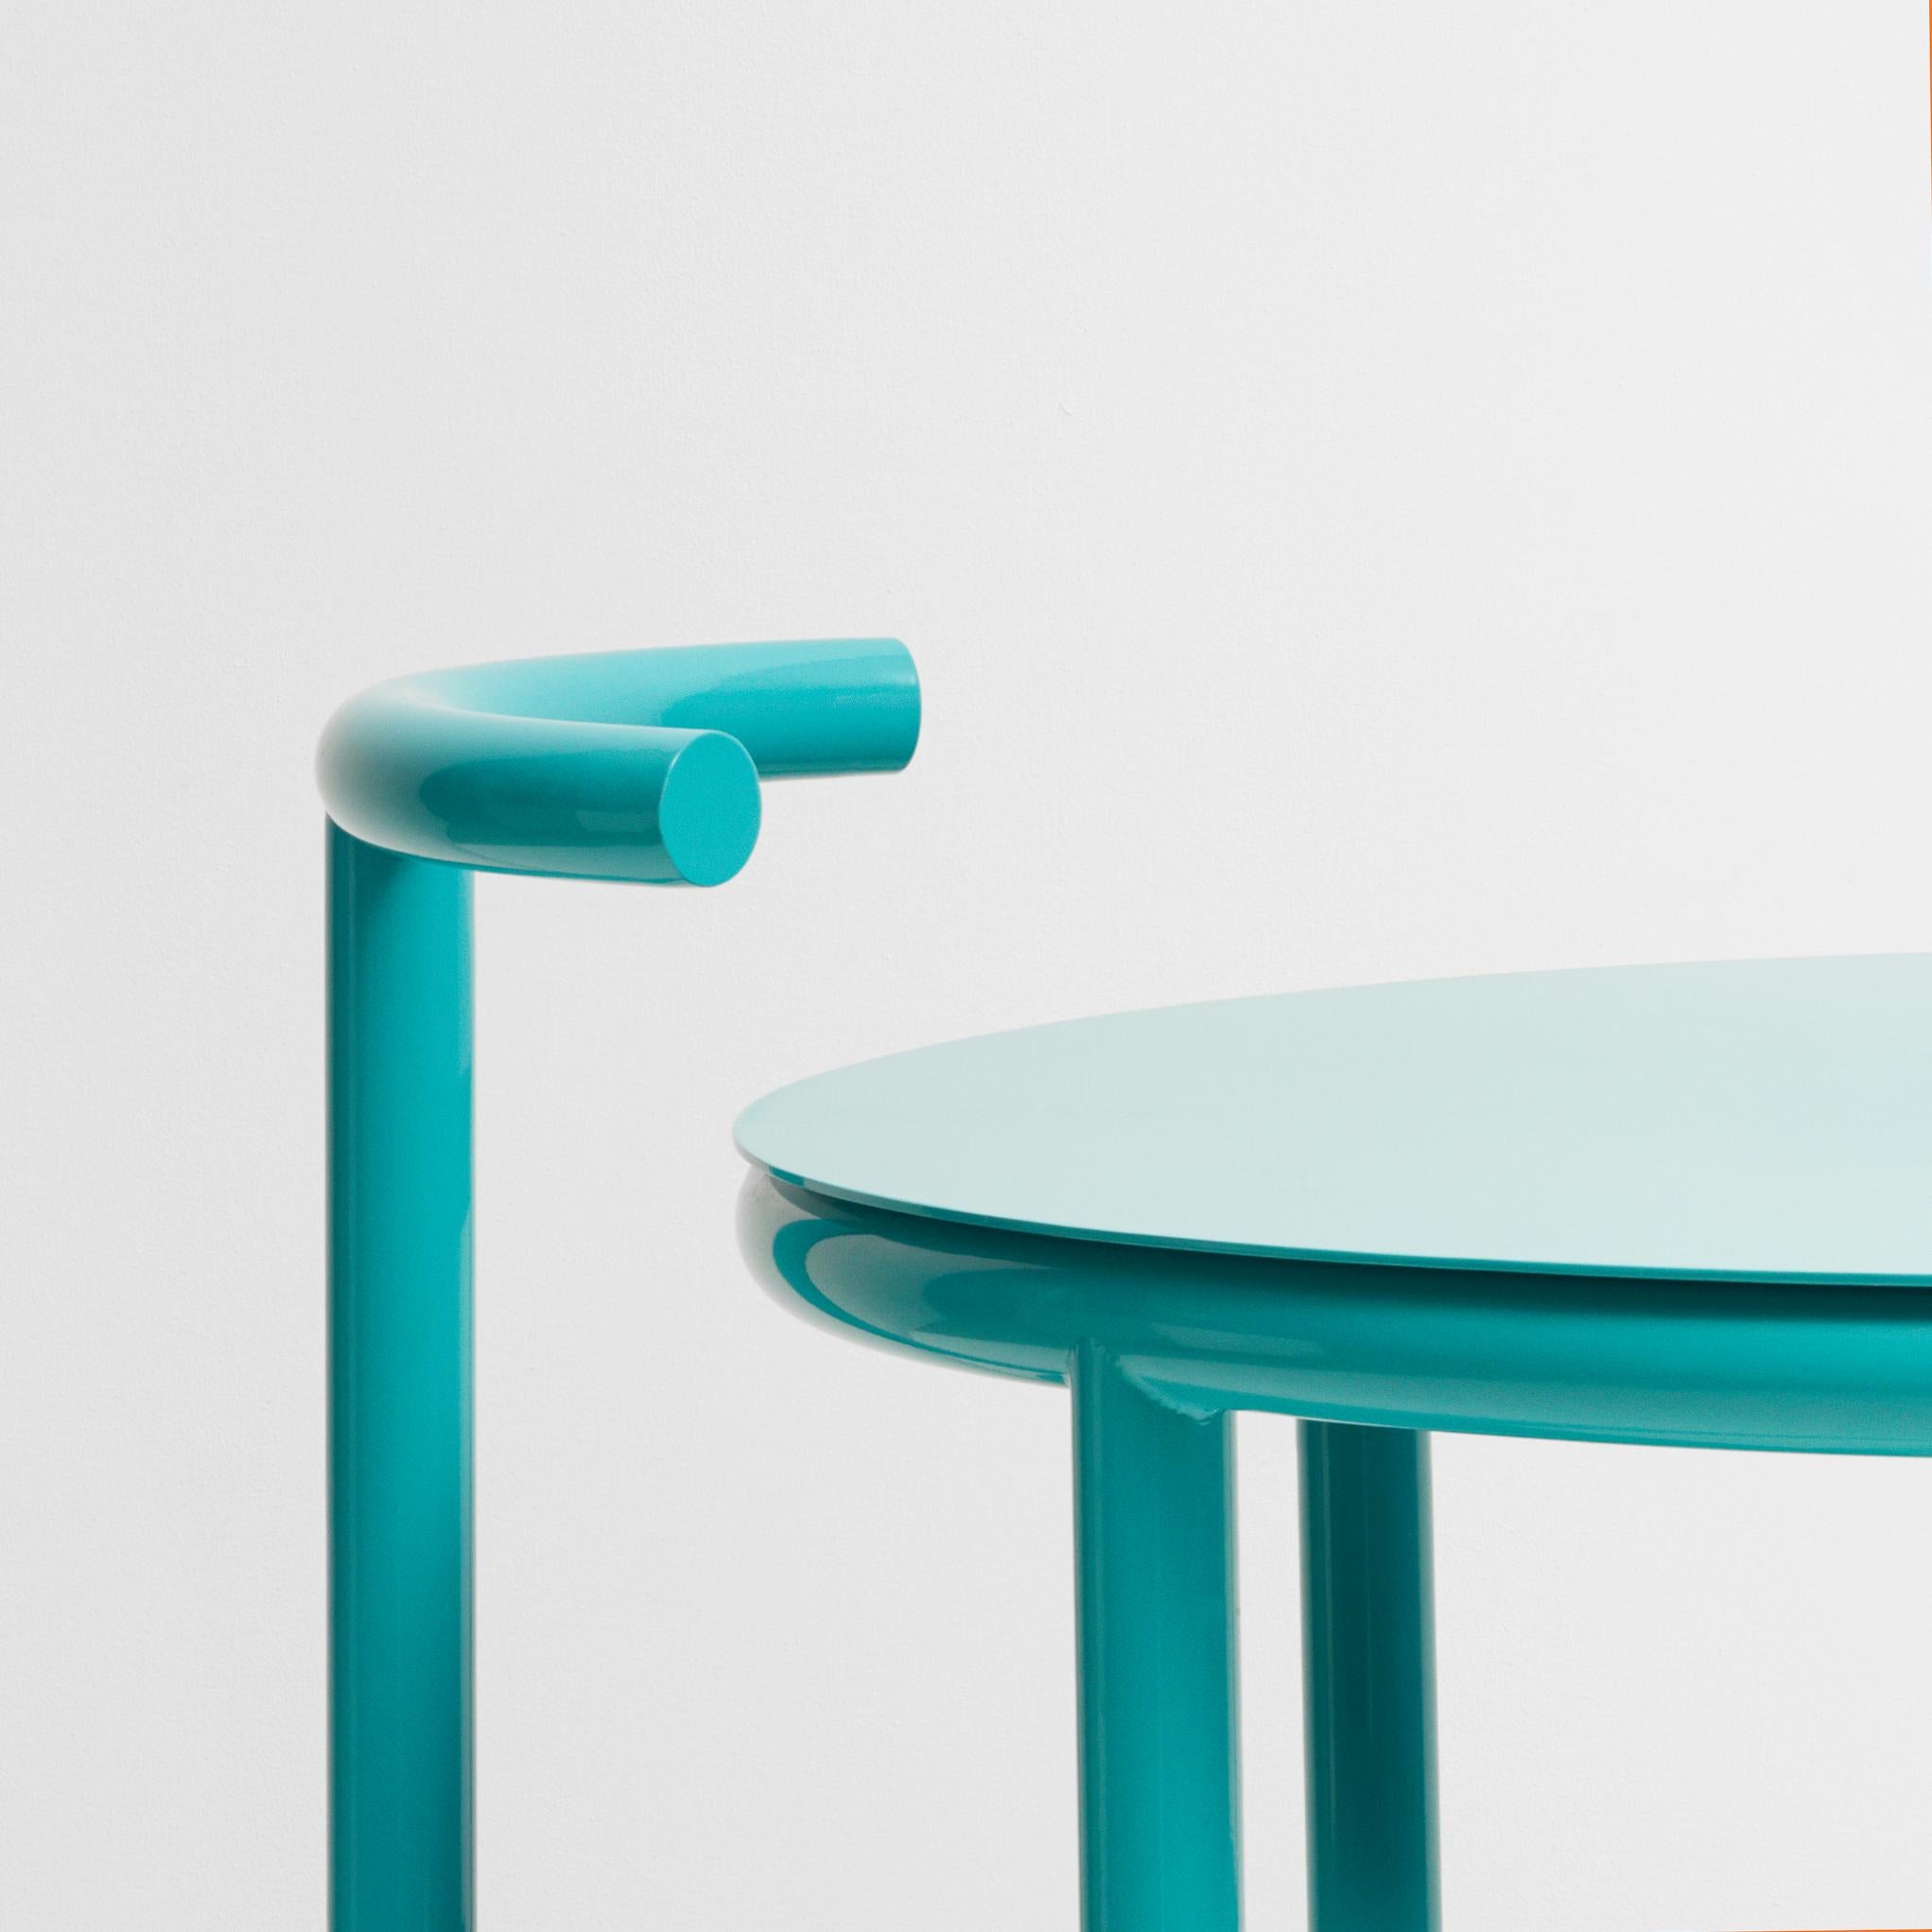 A cafe table originally designed to partner with the B Series chair.

The B - Series takes the graphical shapes found in the urban environment and reimagines them in to a bold statement pieces. With both post-modernist and modernist influences